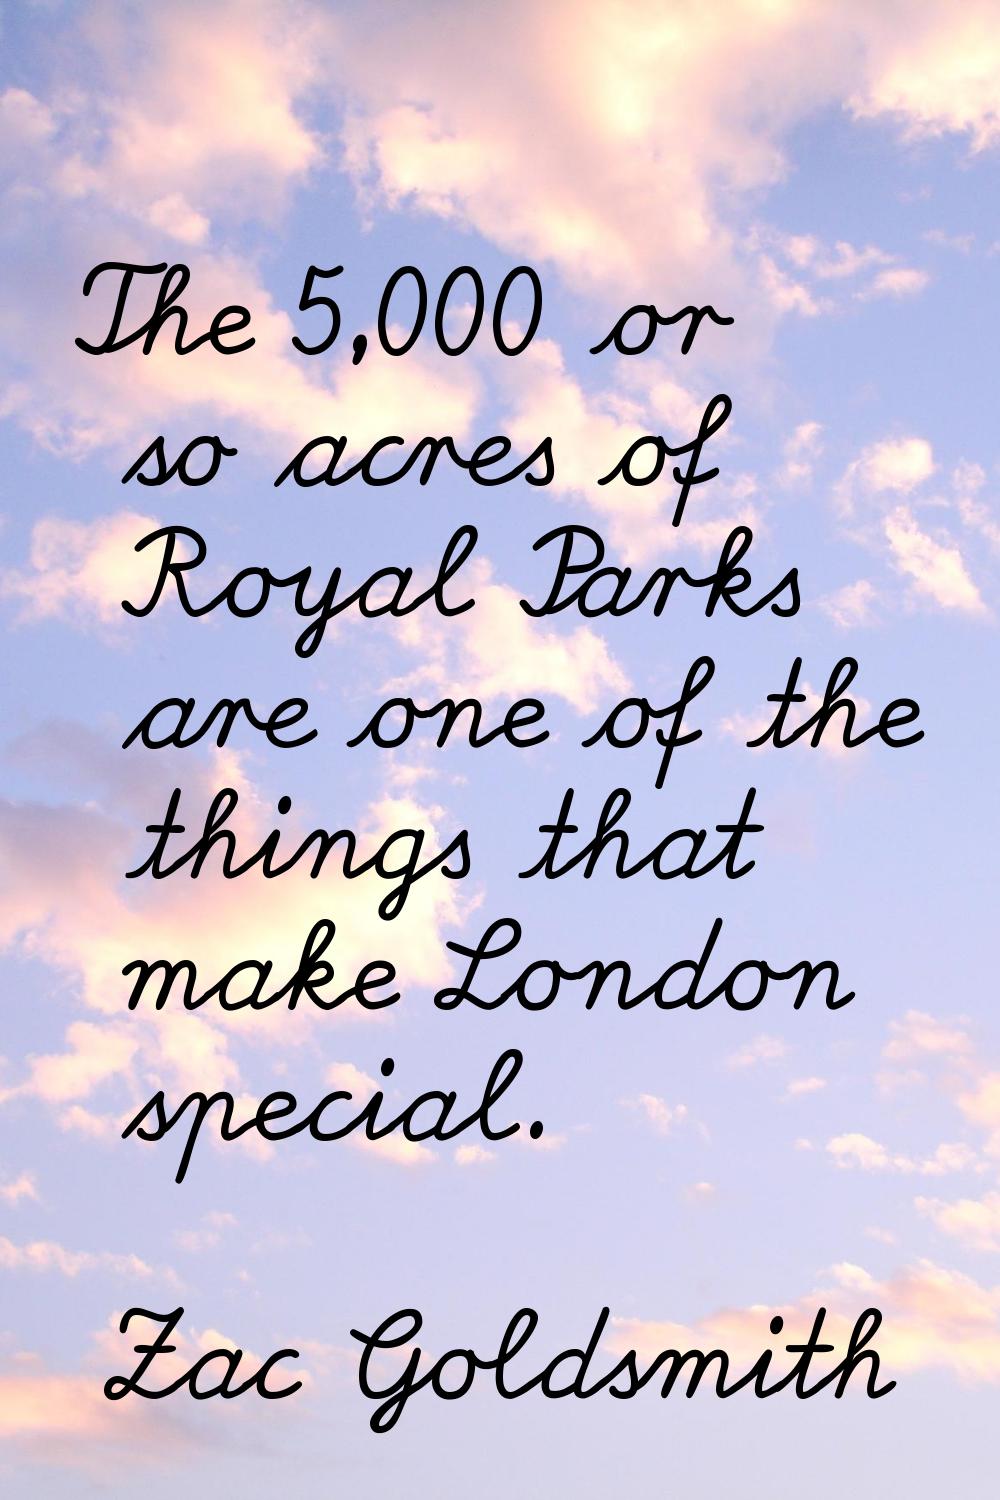 The 5,000 or so acres of Royal Parks are one of the things that make London special.